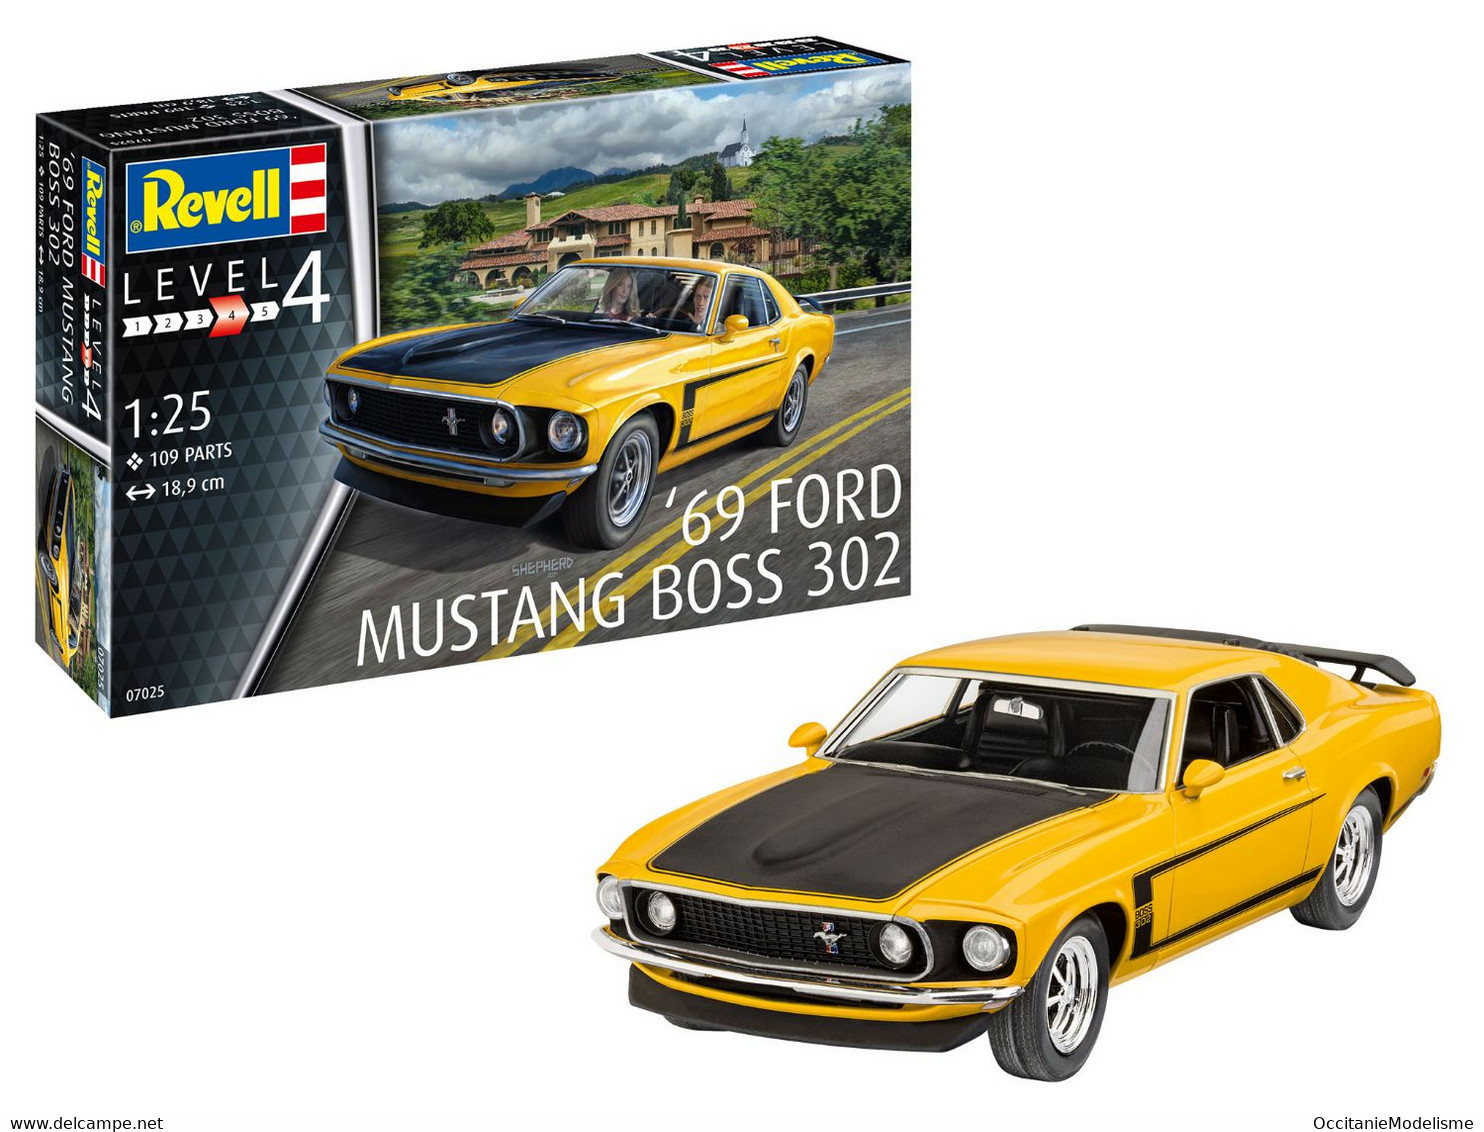 Revell - FORD MUSTANG BOSS 302 1969 Maquette Kit Plastique Réf. 07025 Neuf 1/25 - Automobili